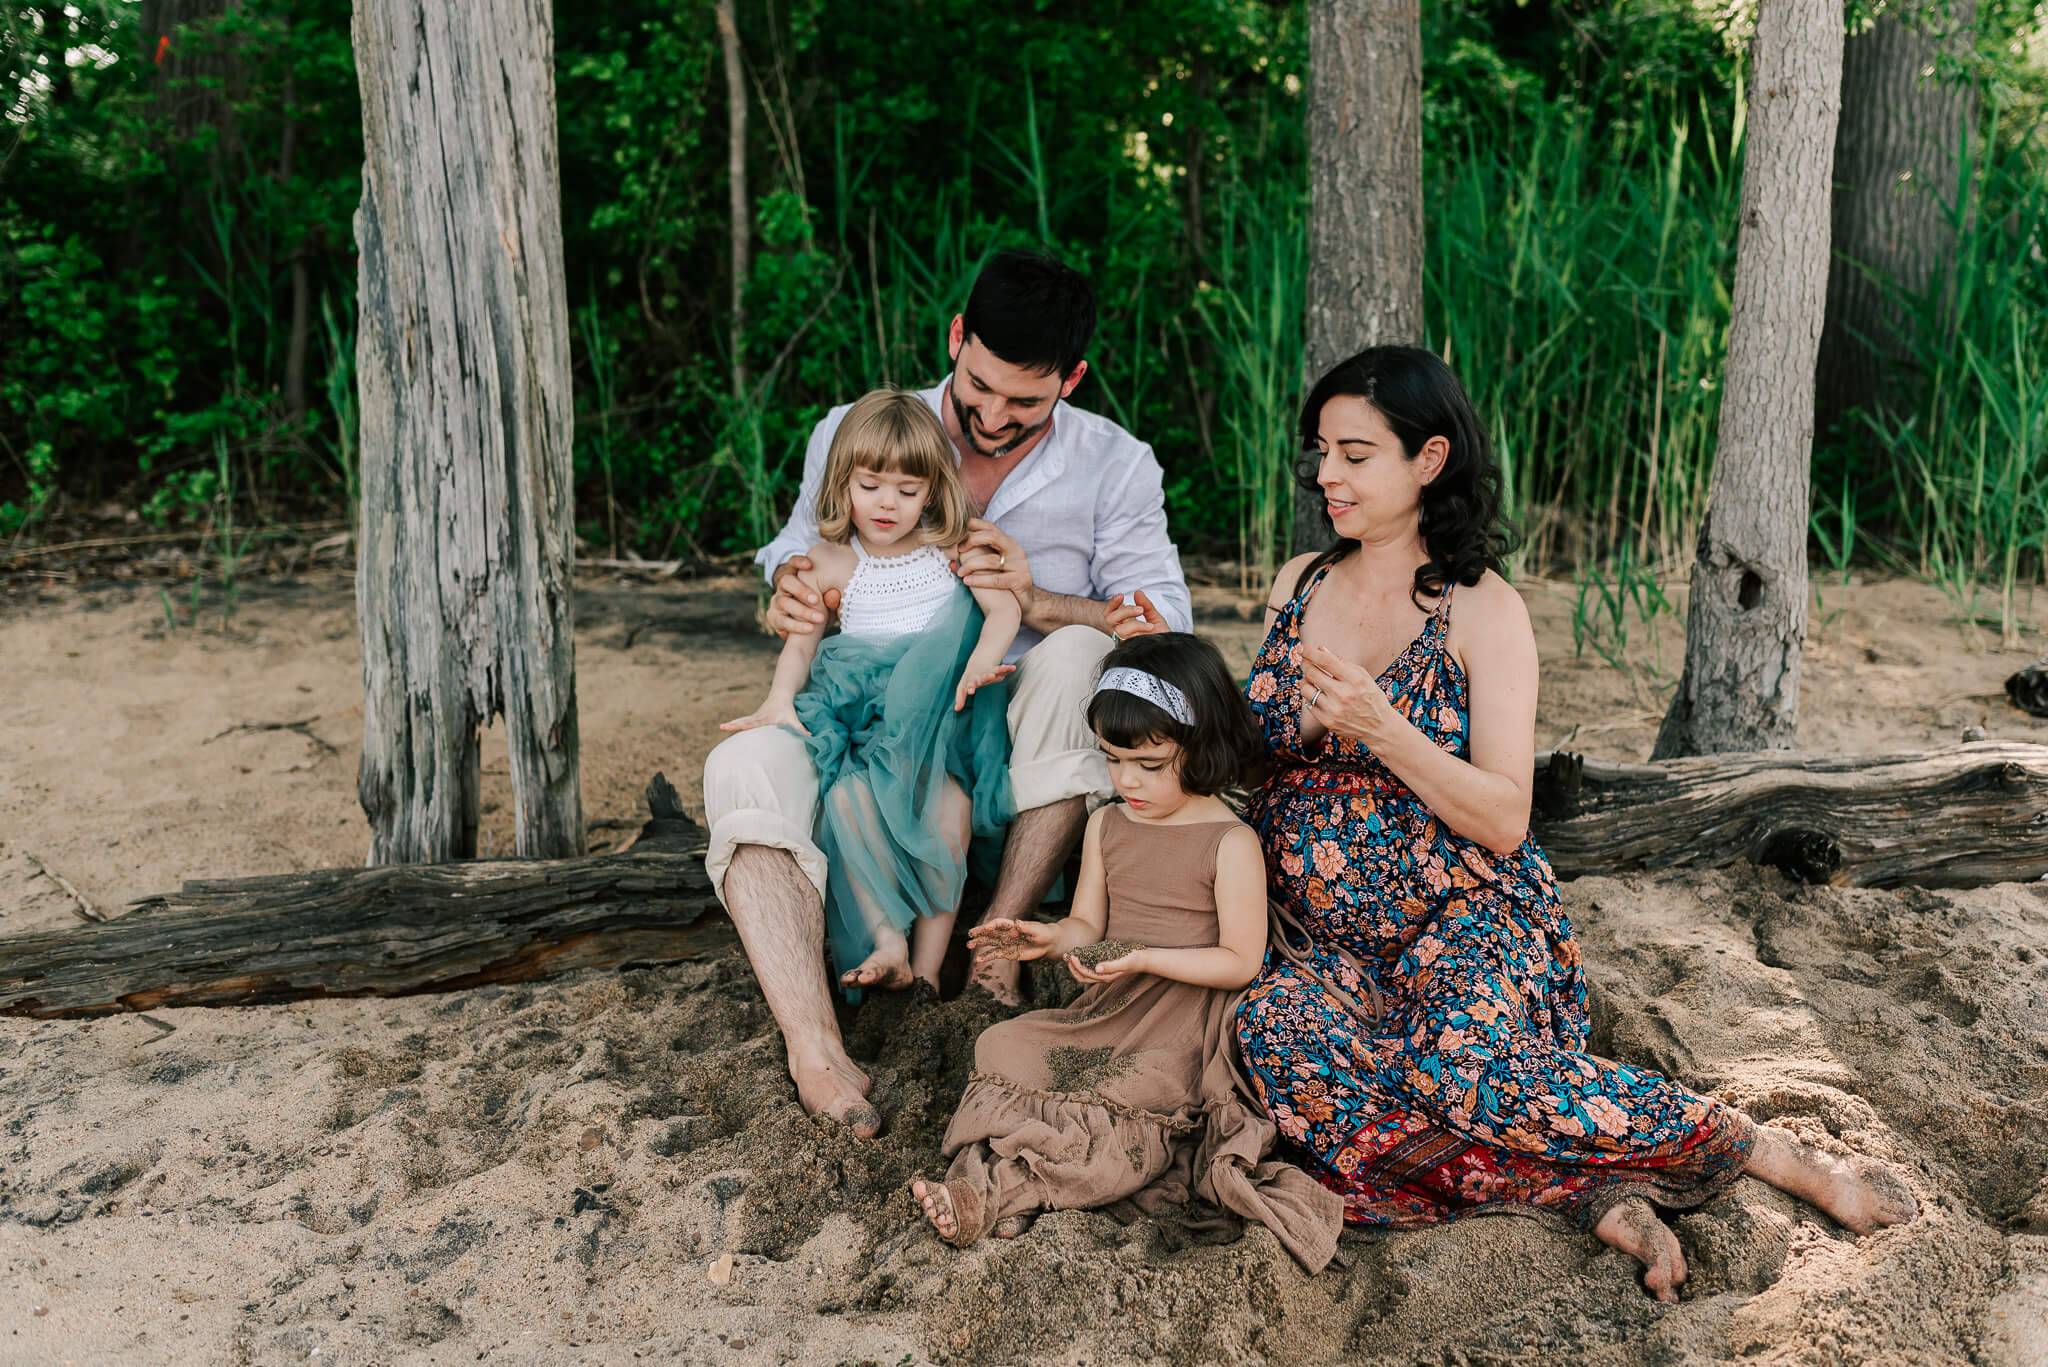 A pregnant mother plays with the hair of her daughter, sitting in the sand in front of her while dad sits on a log with their other daughter in his lap